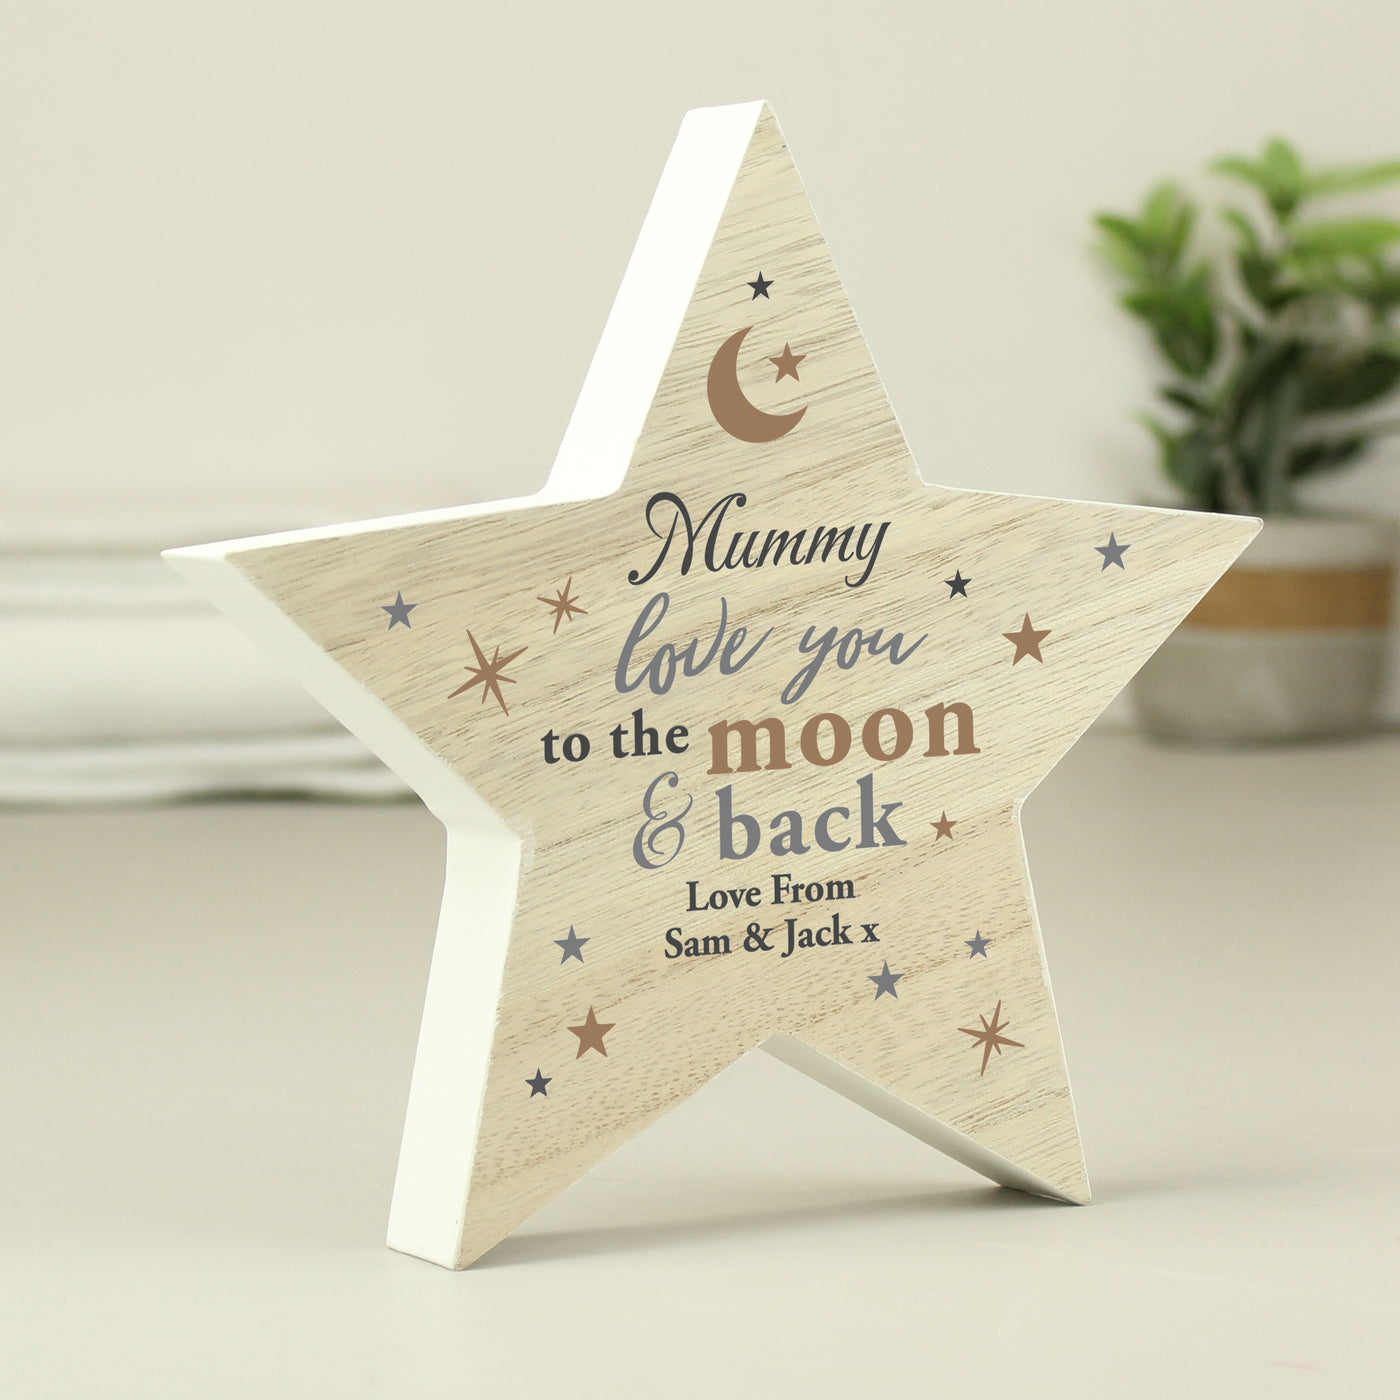 Personalised Love You Wooden Star Ornament